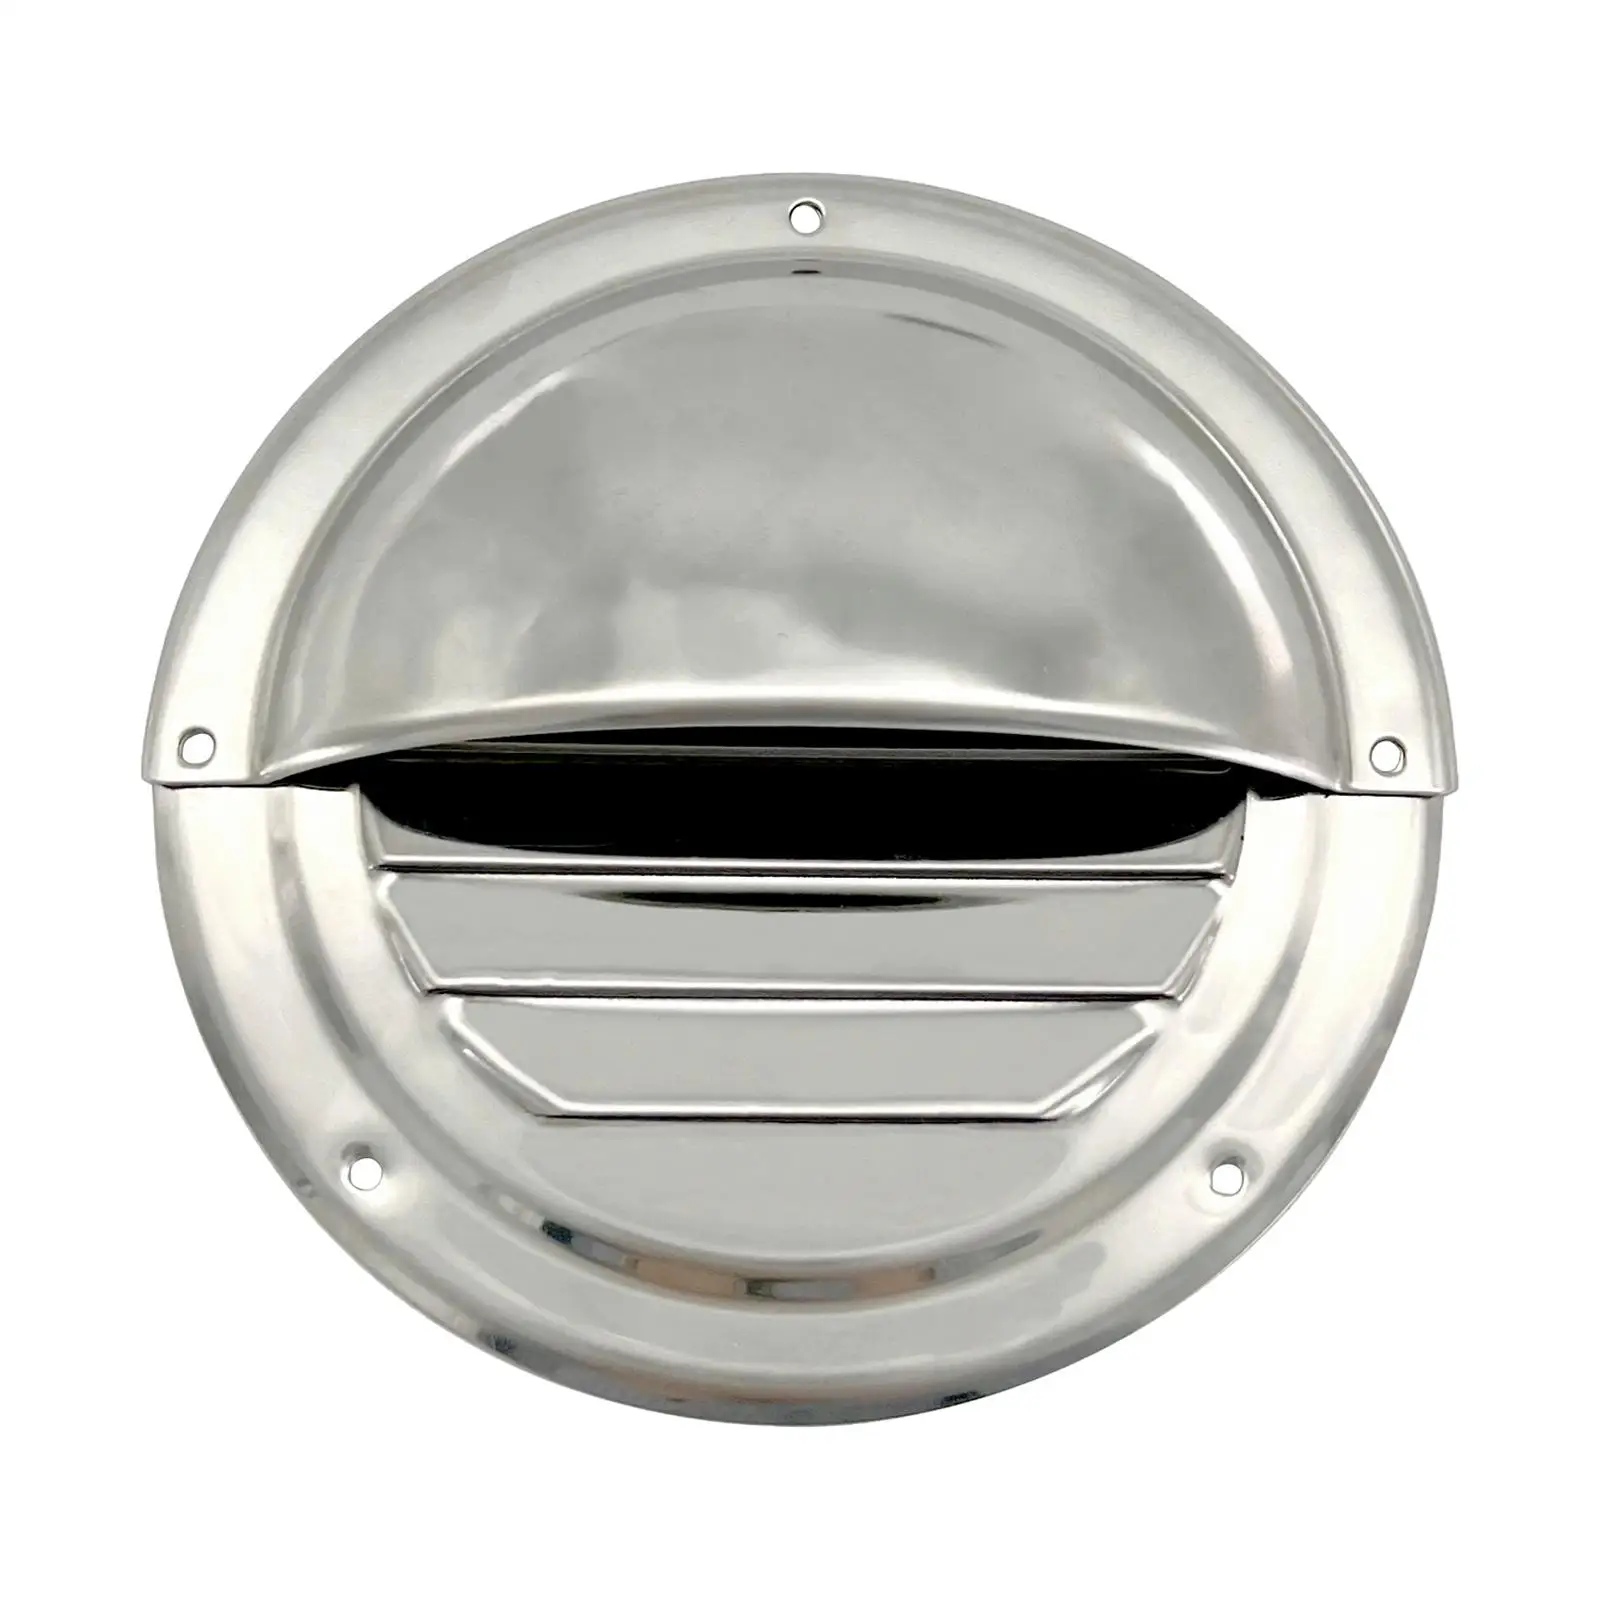 

Marine Boat 5" Round Louvered Air Vent, Grille Cover Vent Ventilation Ventilator Cover for Boat Yacht Accessories Caravan